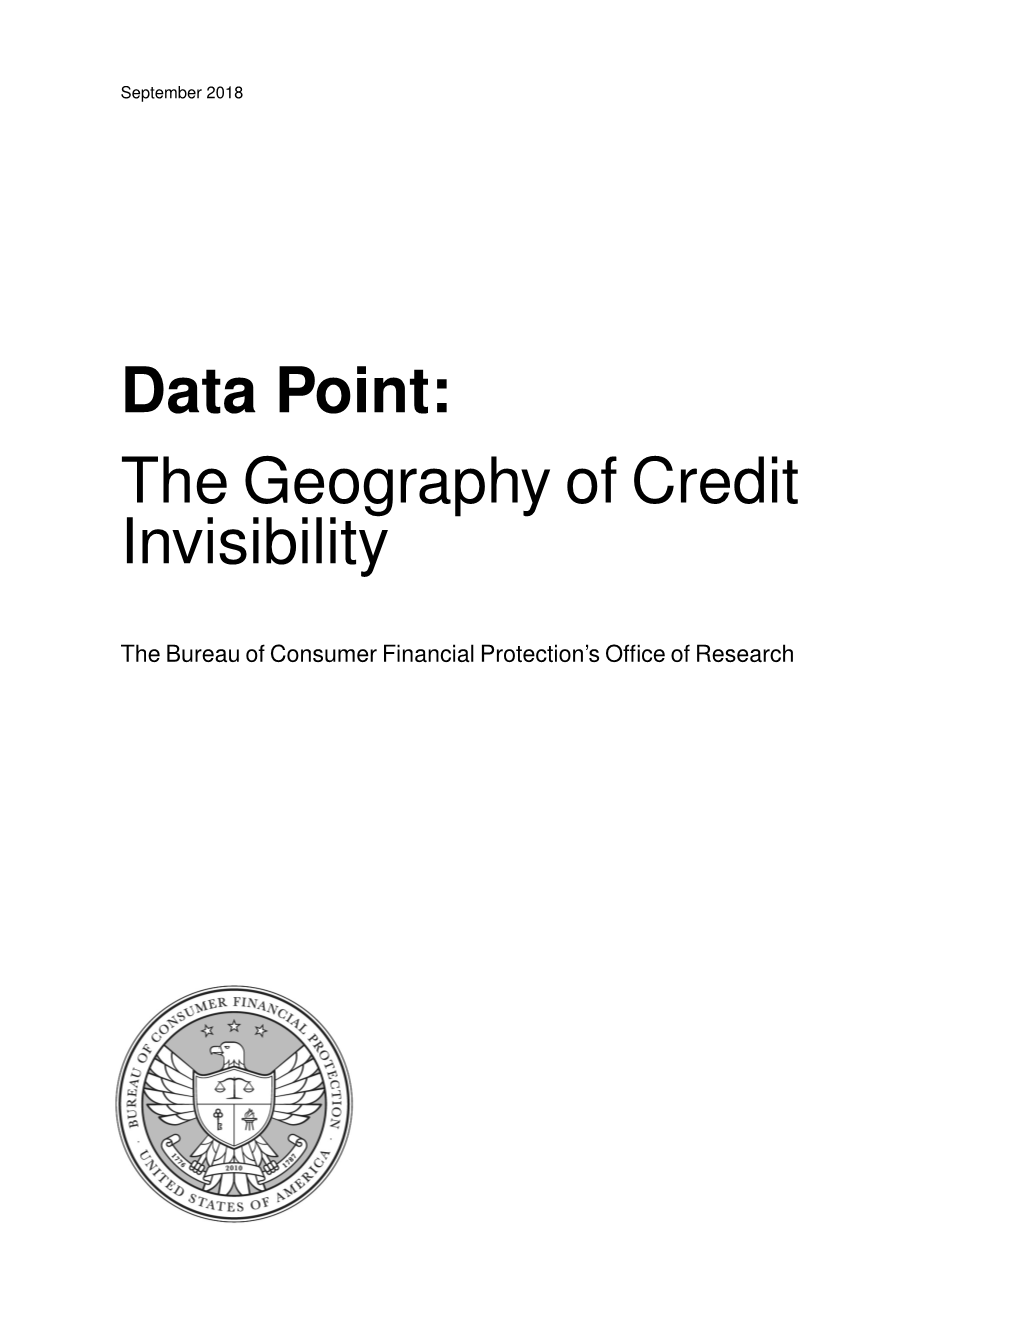 Data Point: the Geography of Credit Invisibility